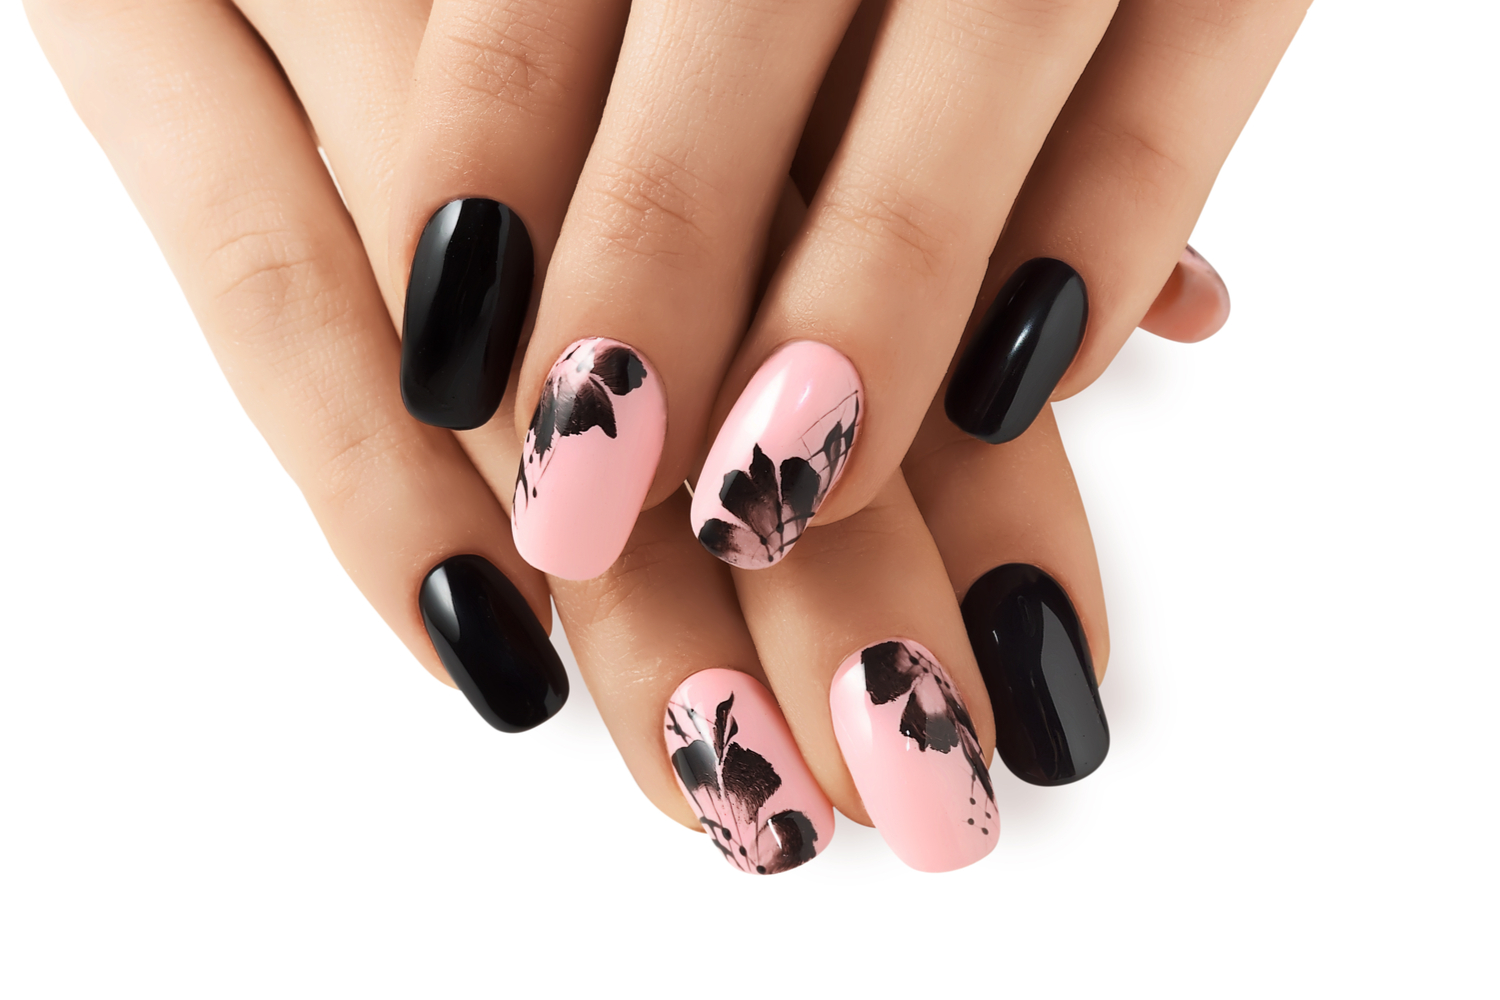 Learn Nail Art  Get Creative With Professional Designs